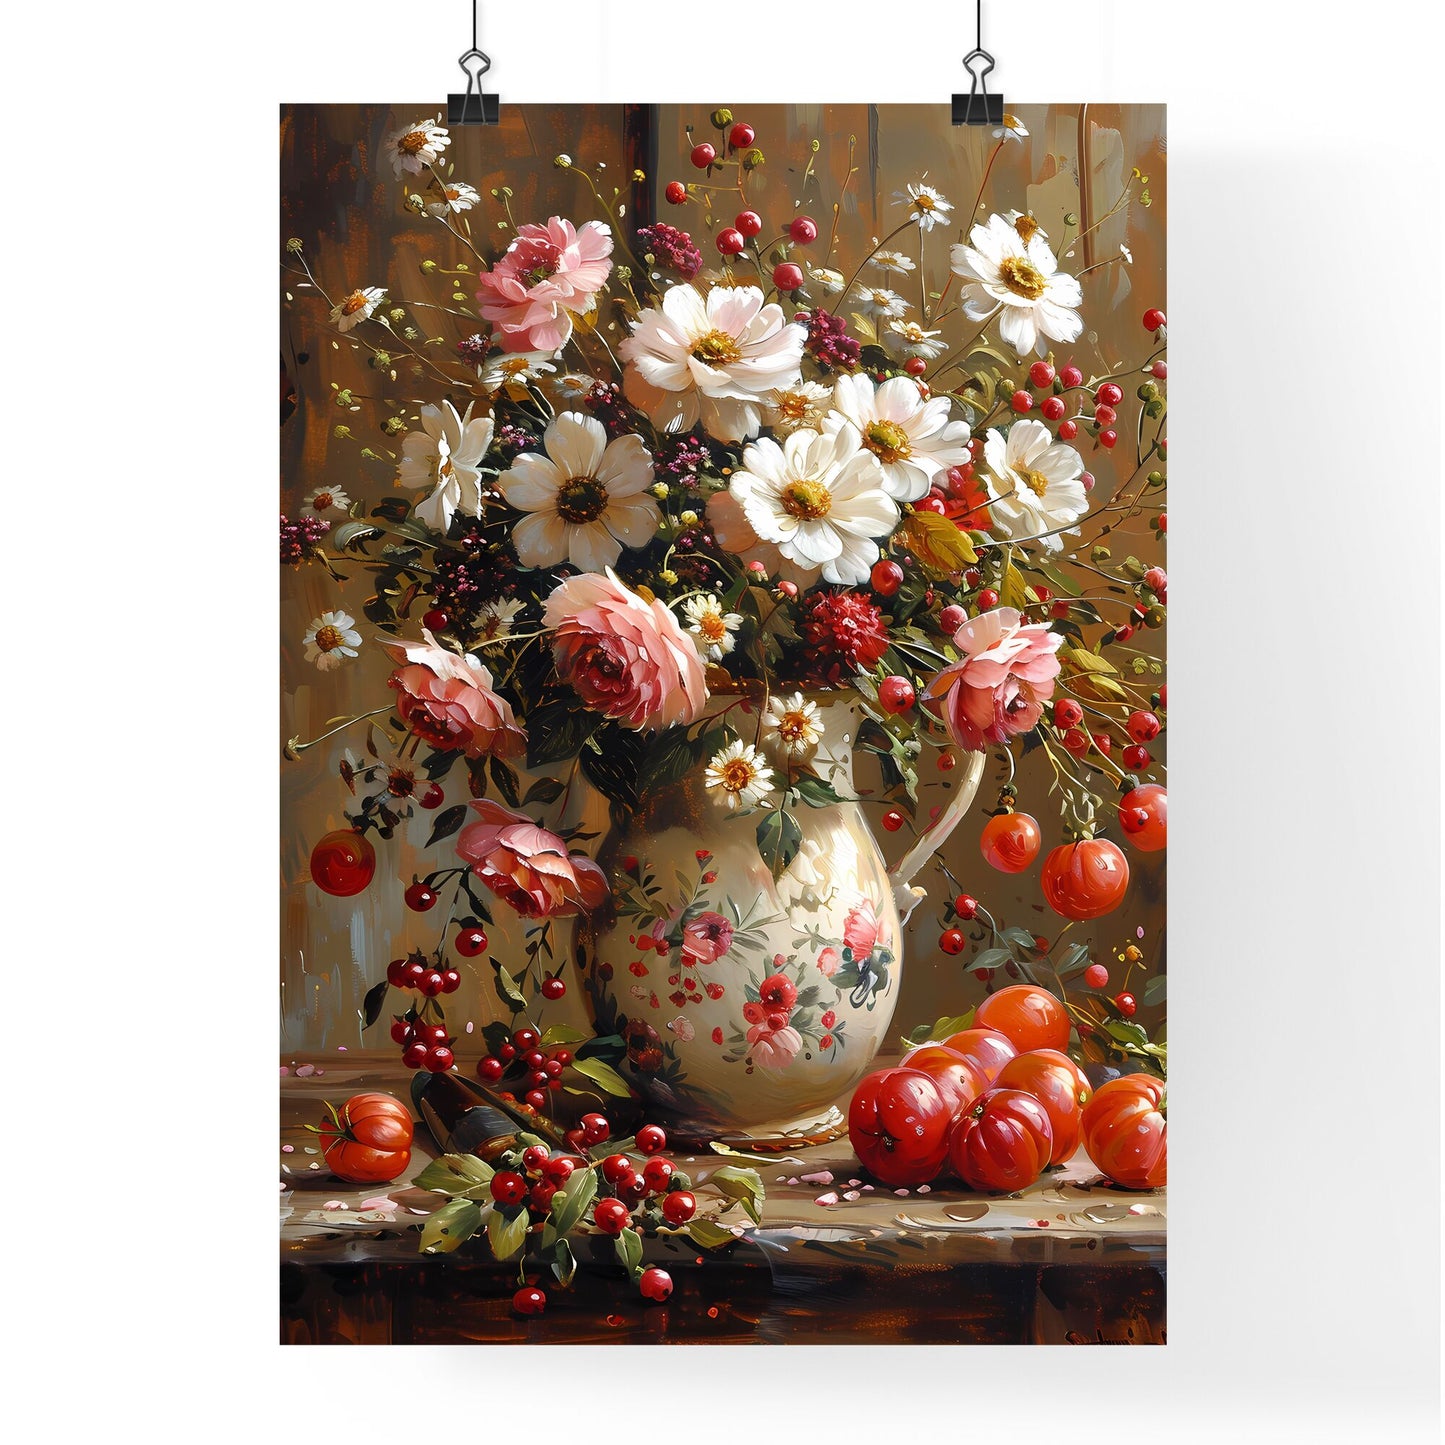 Vibrant Fine Art Floral Painting: Rustic Bouquet in Antique Pitcher on Country Table Default Title